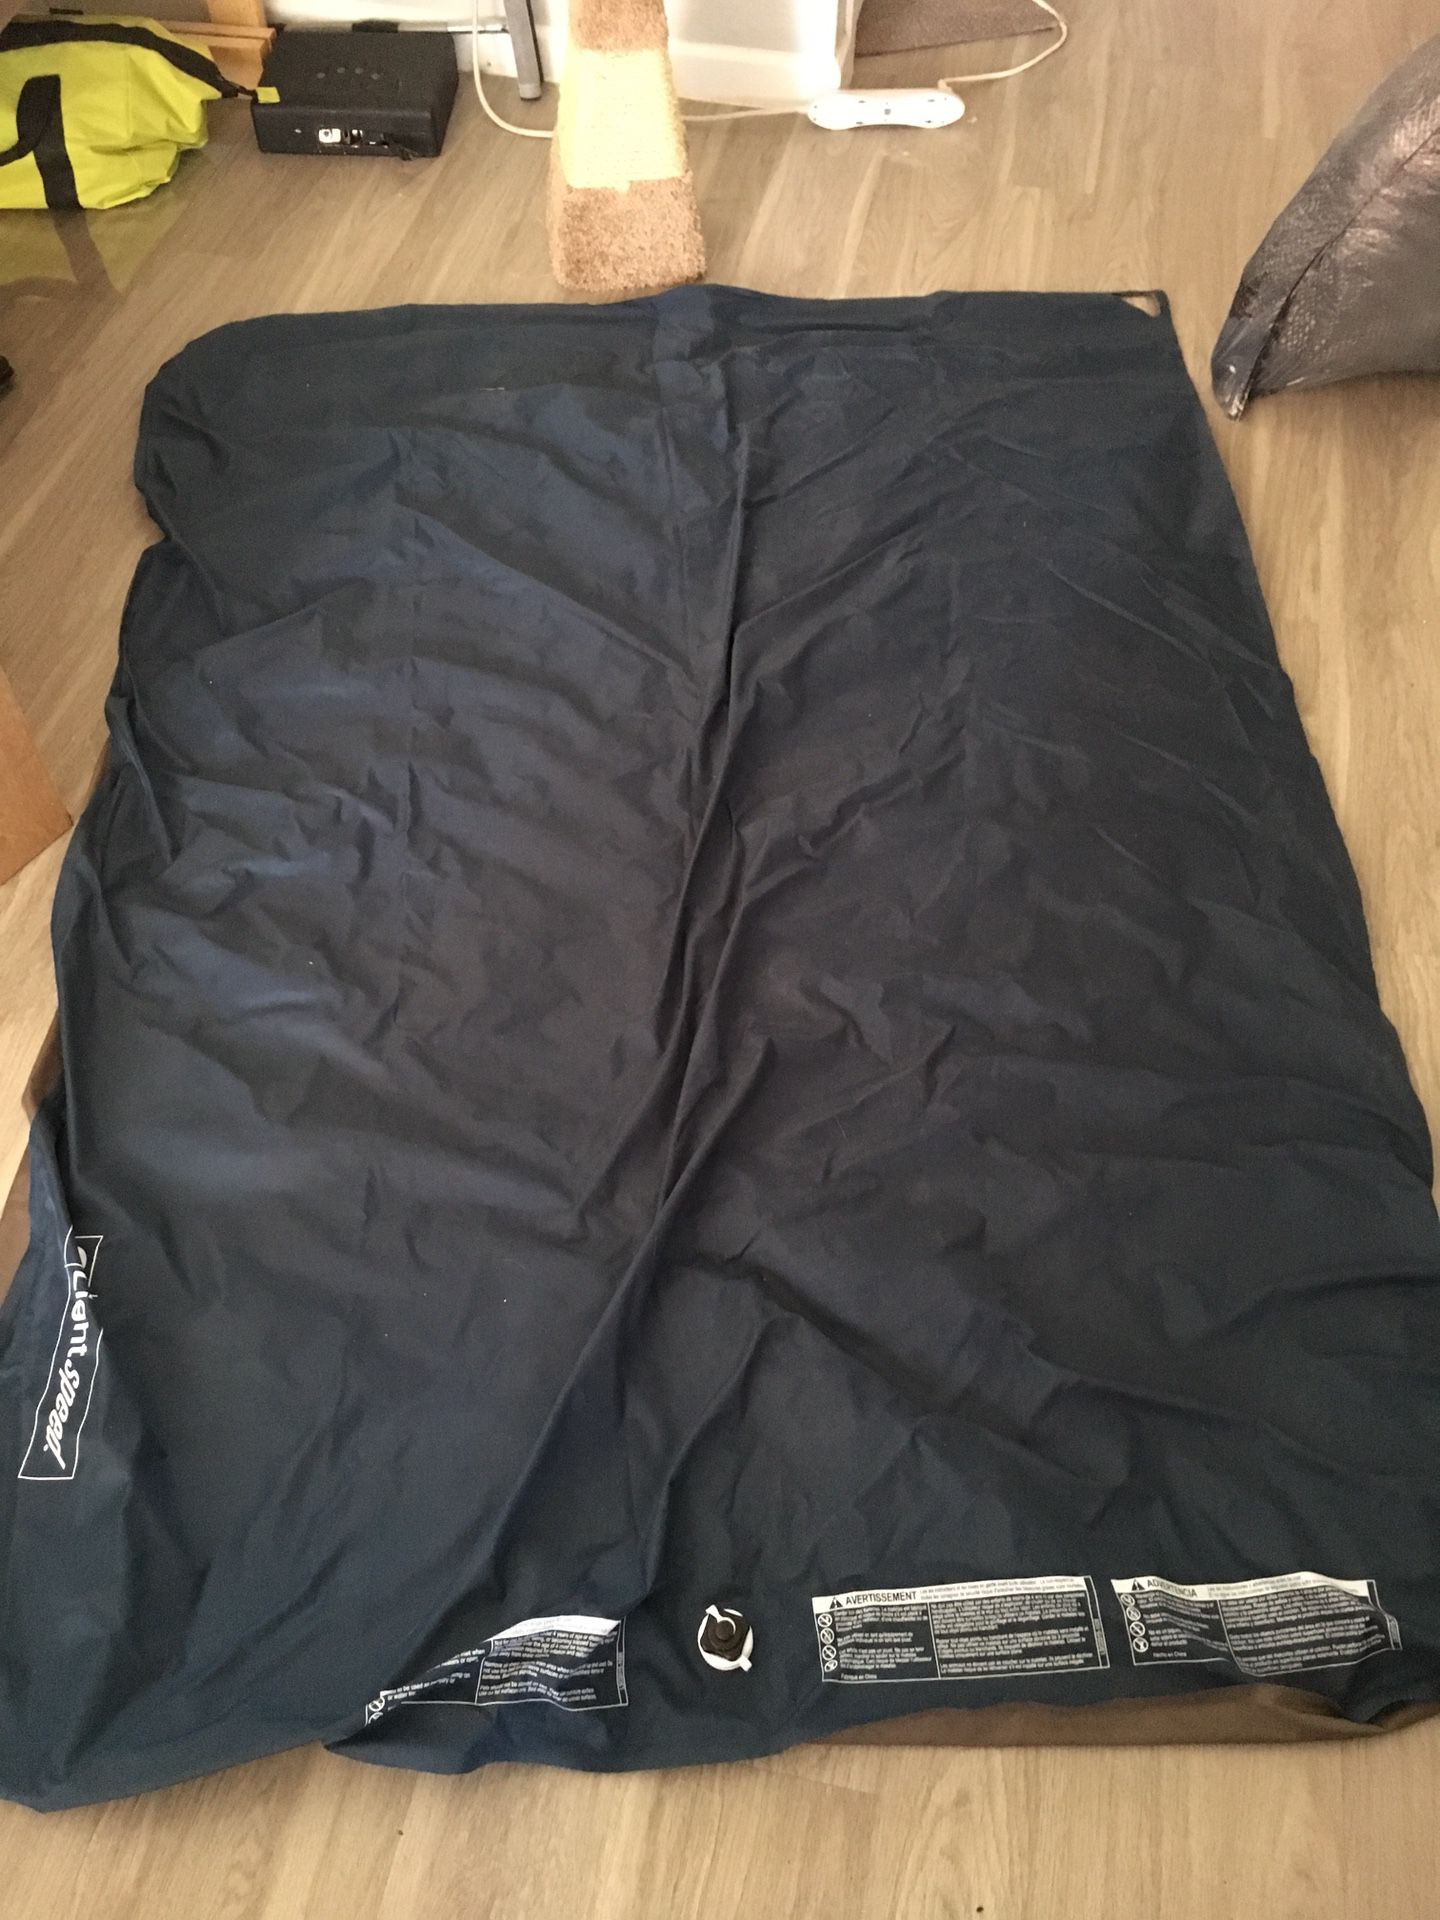 Twin air mattress with pump - like new